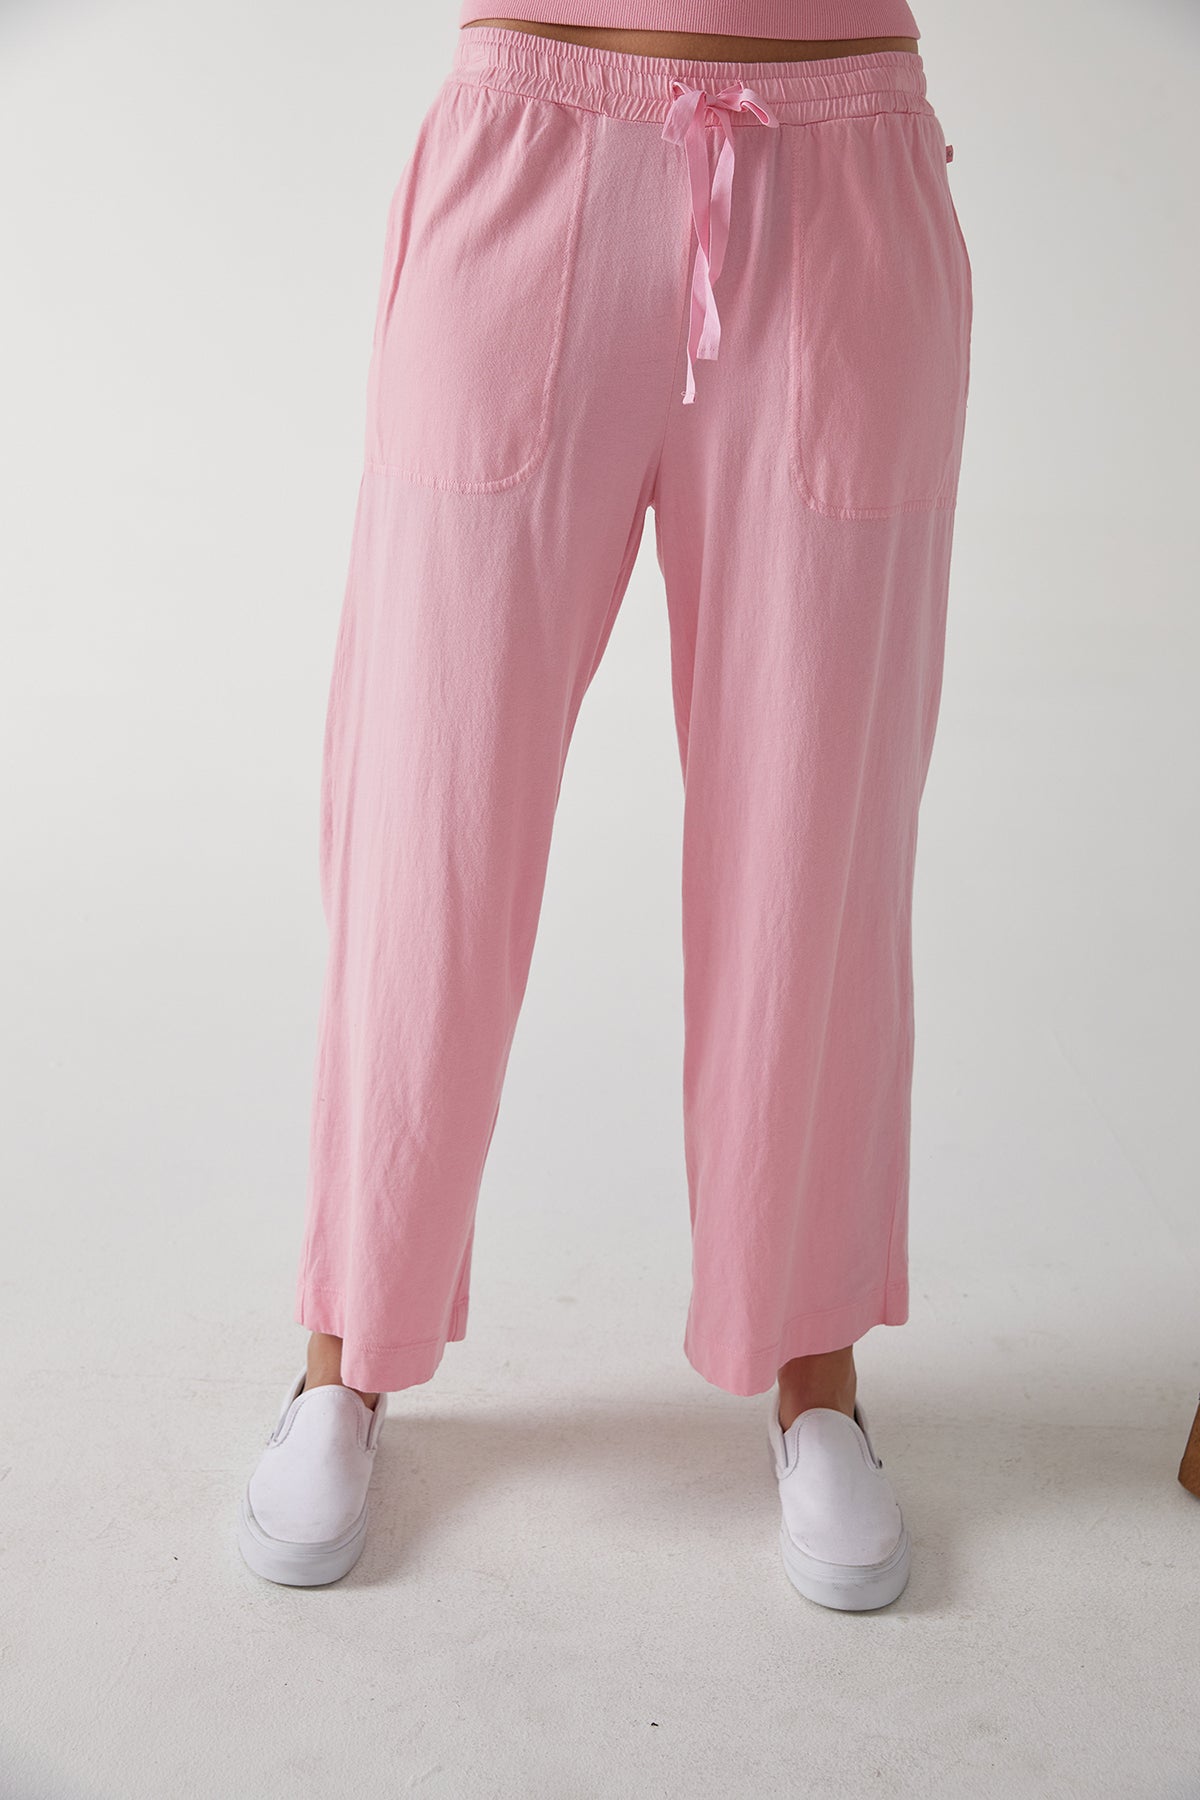 pismo pant cupid front-24331156160705